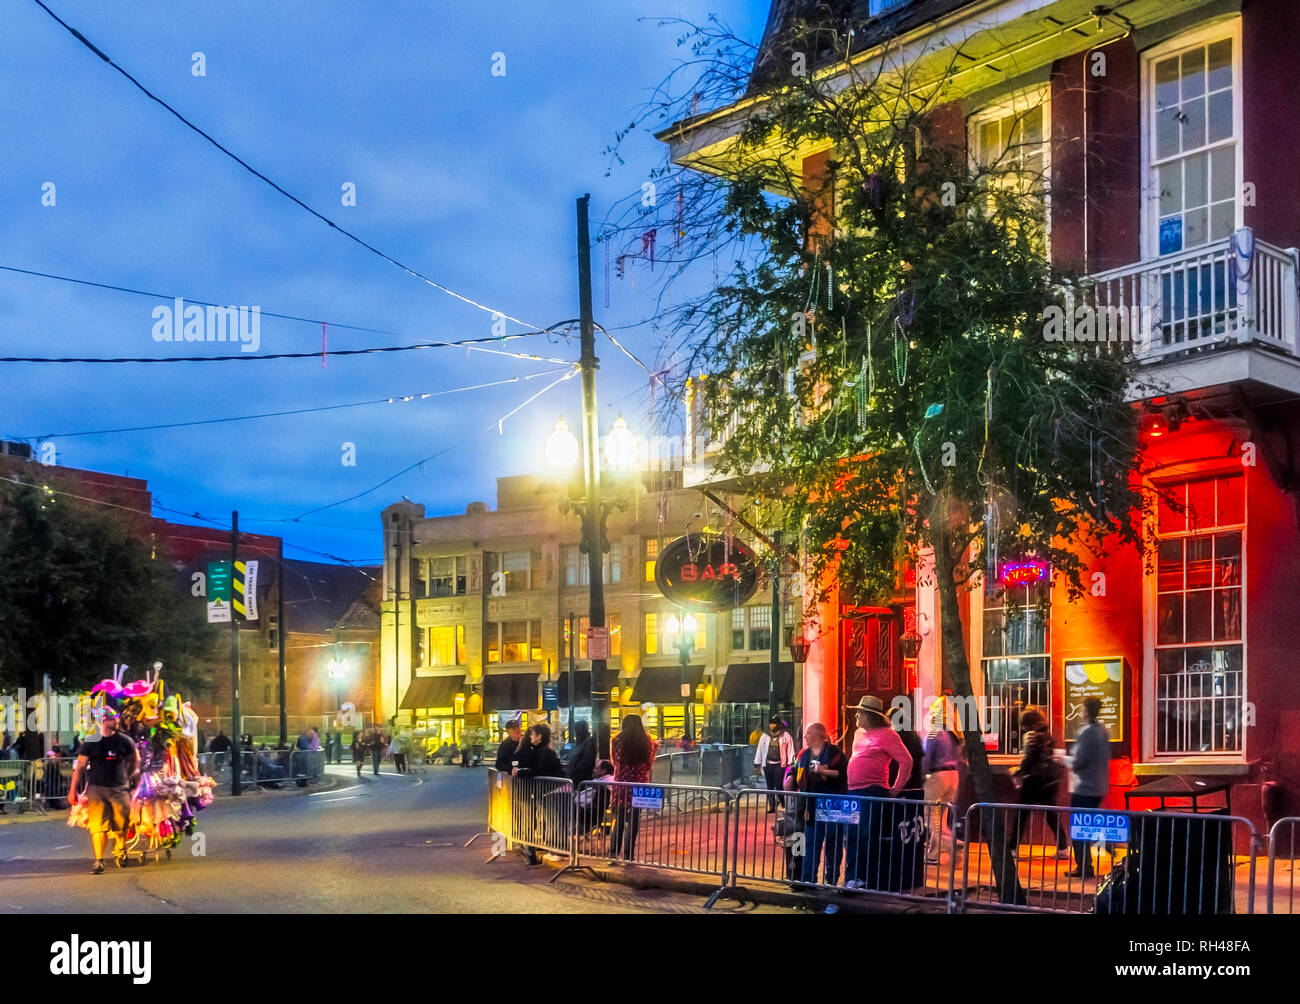 People wait outside Circle Bar for the Krewe of Hermes Mardi Gras parade at Lee Circle, Feb. 28, 2014, in New Orleans, Louisiana. Stock Photo